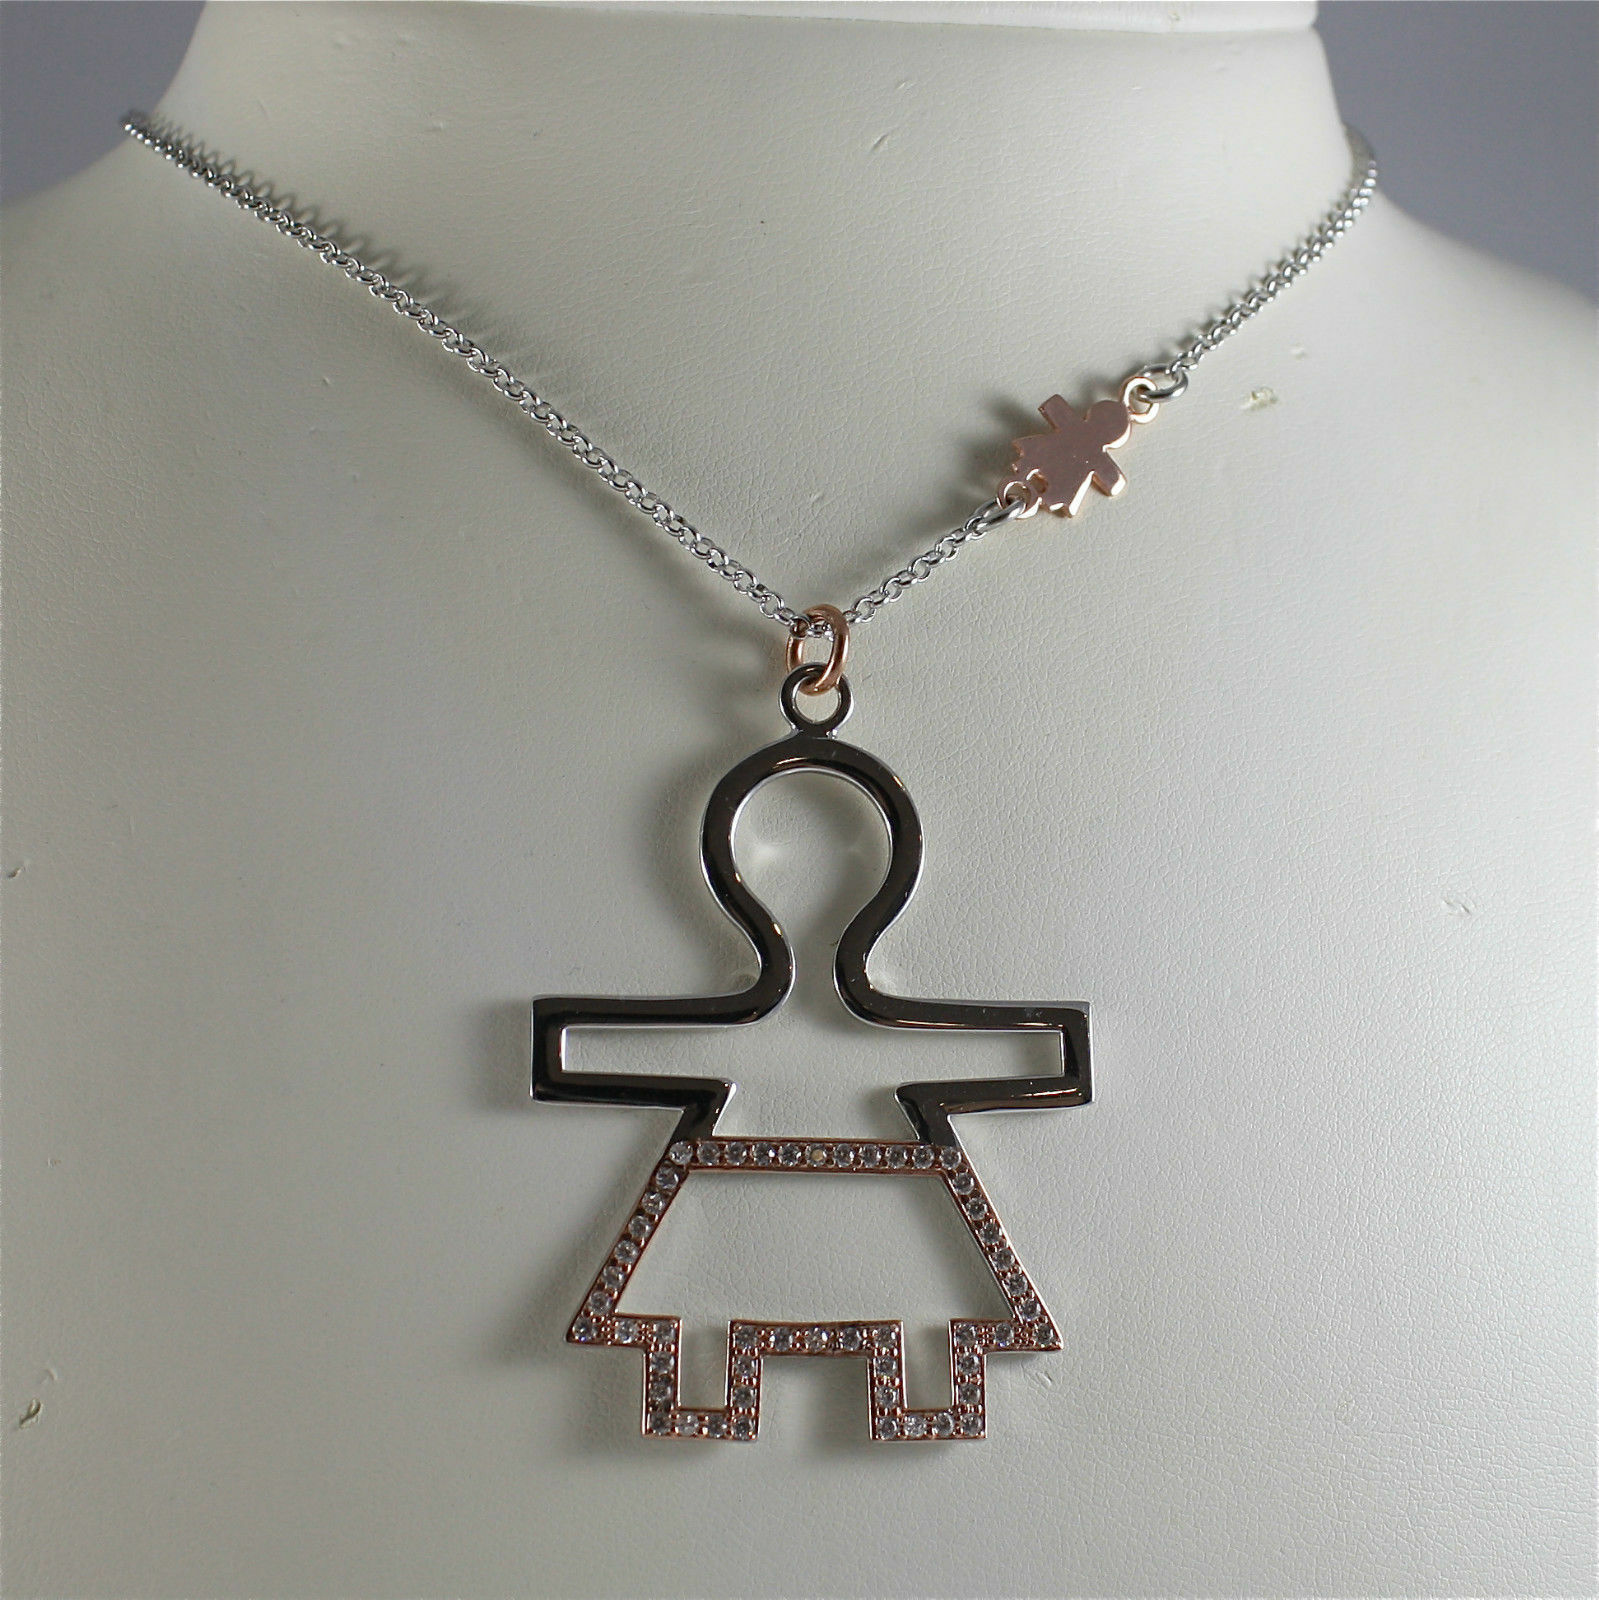 Primary image for 925 SILVER, AQUAFORTE NECKLACE, RHODIUM SILVER, ROSE PLATED BABY CHARM, ZIRCONIA